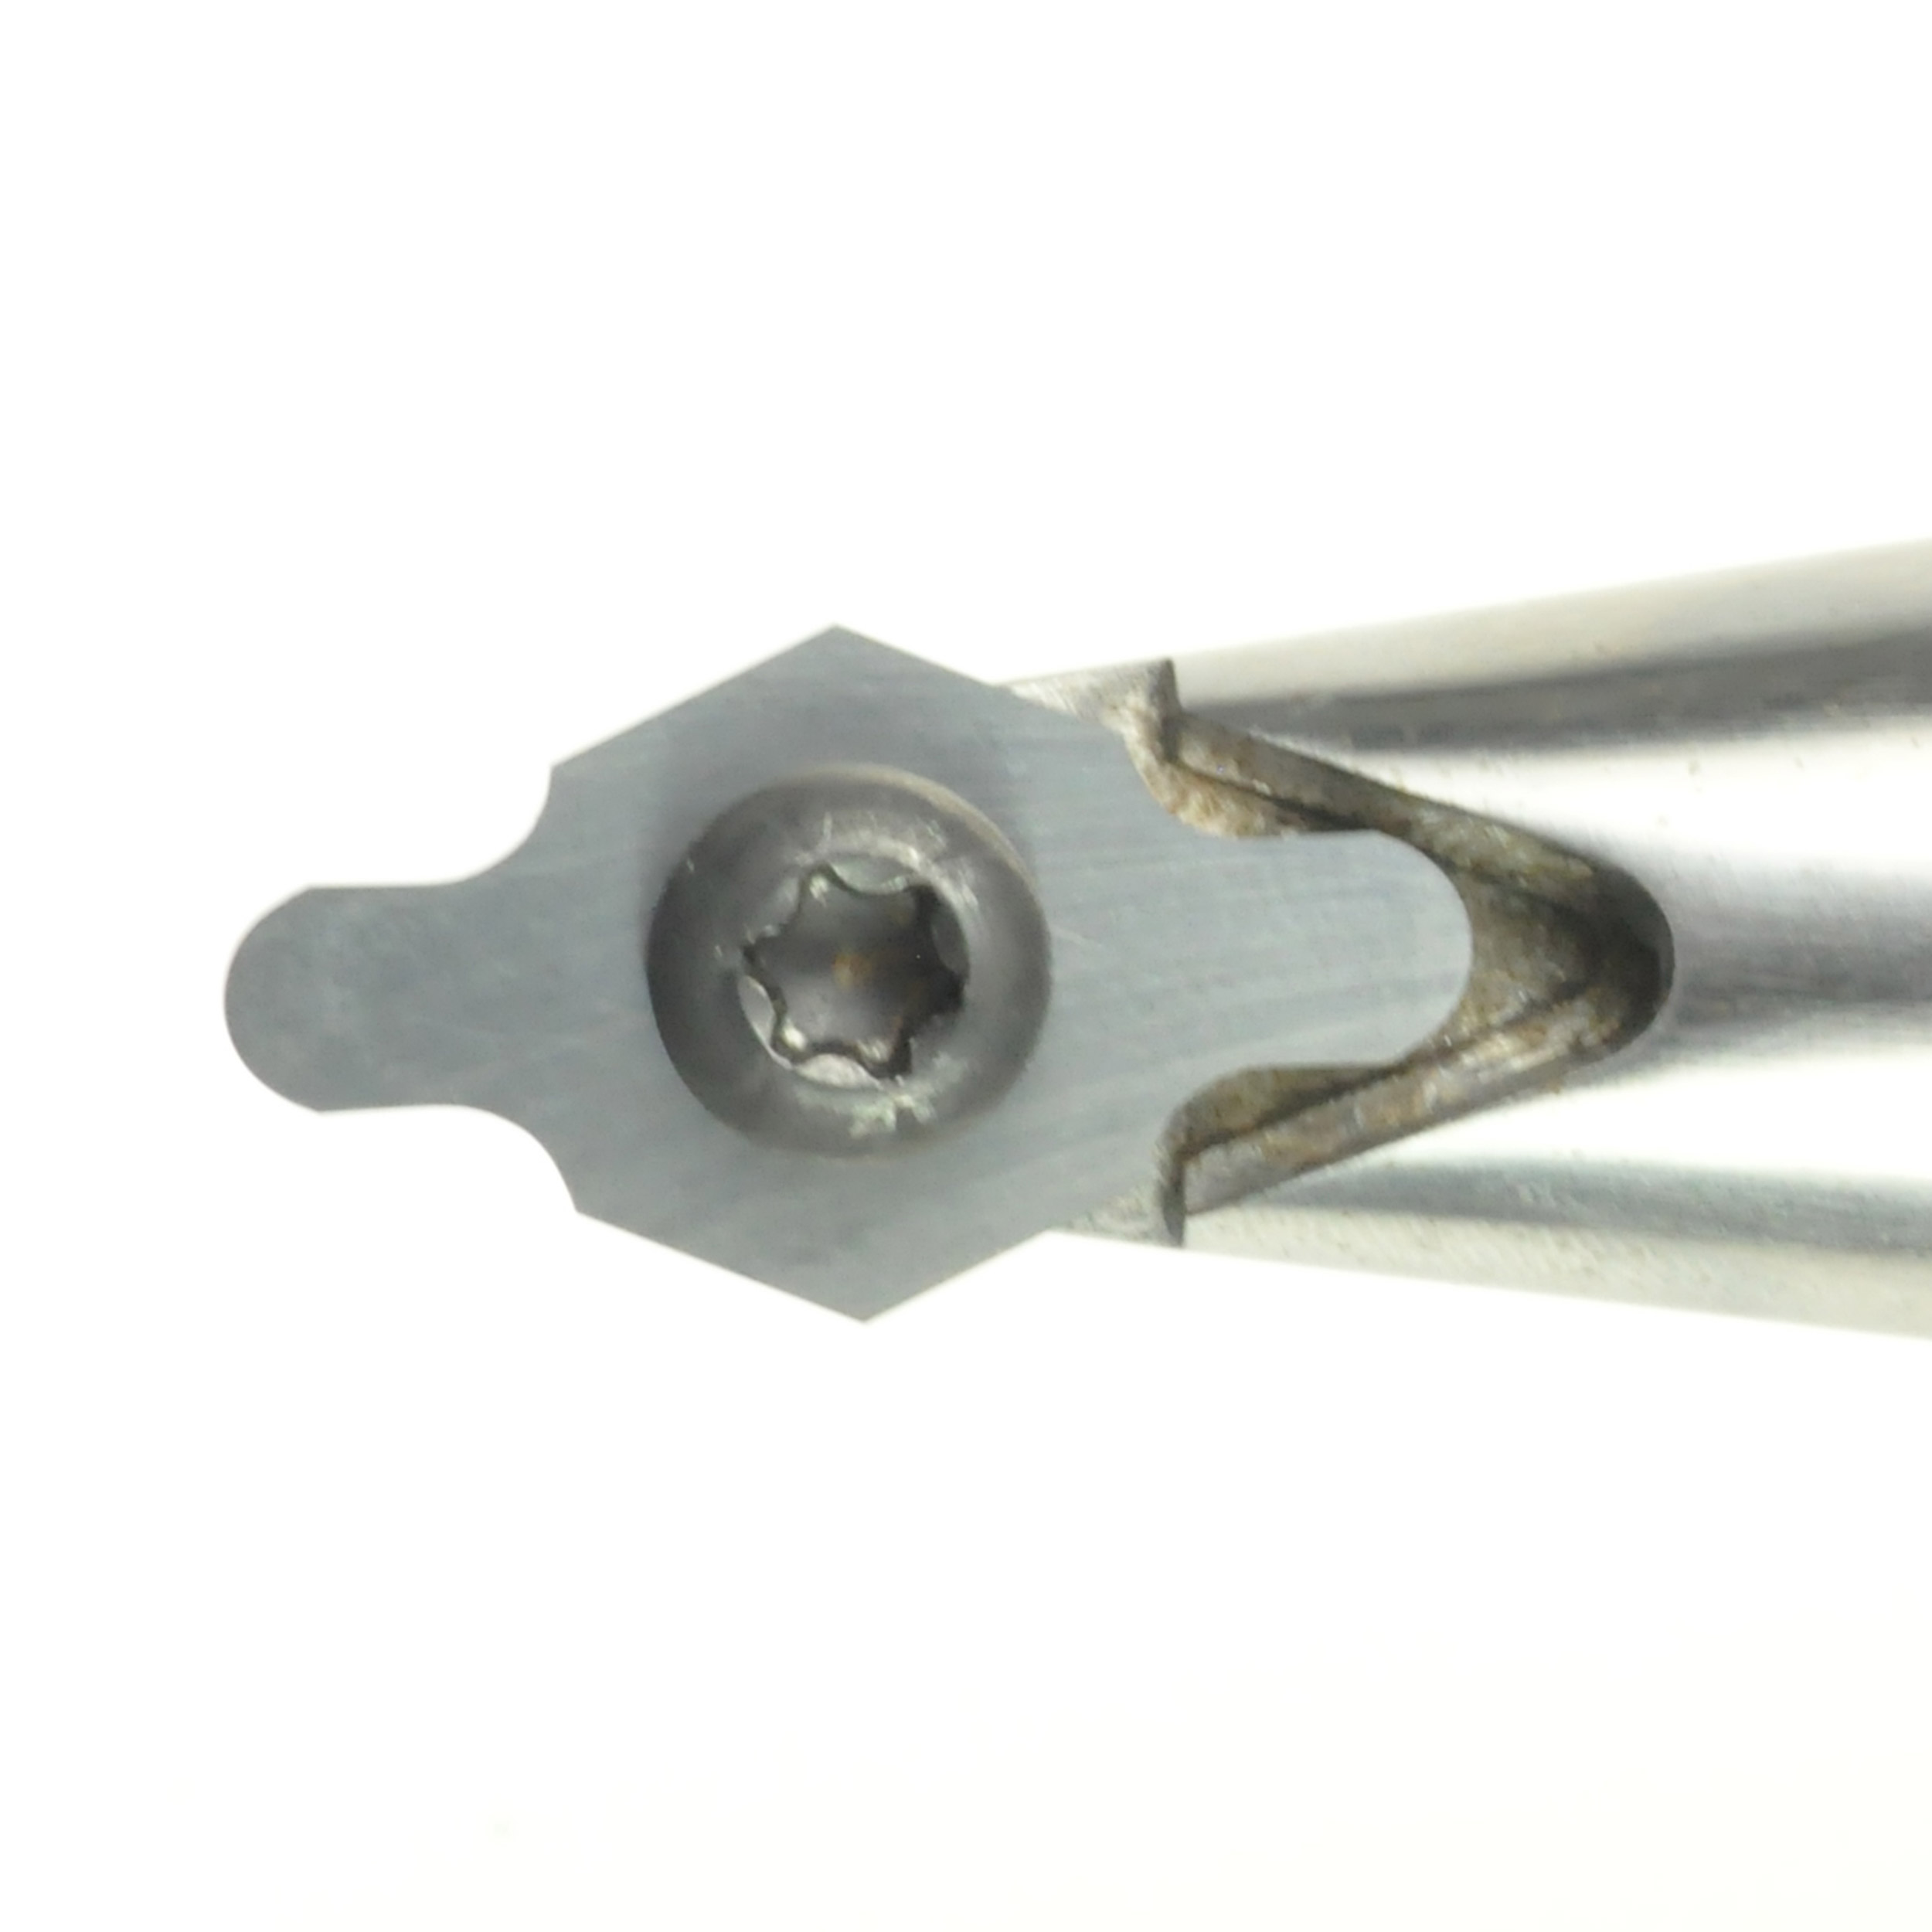 Detailing 3/16r Insert Cutter, Carbide, For 70-800 Woodturning Tools